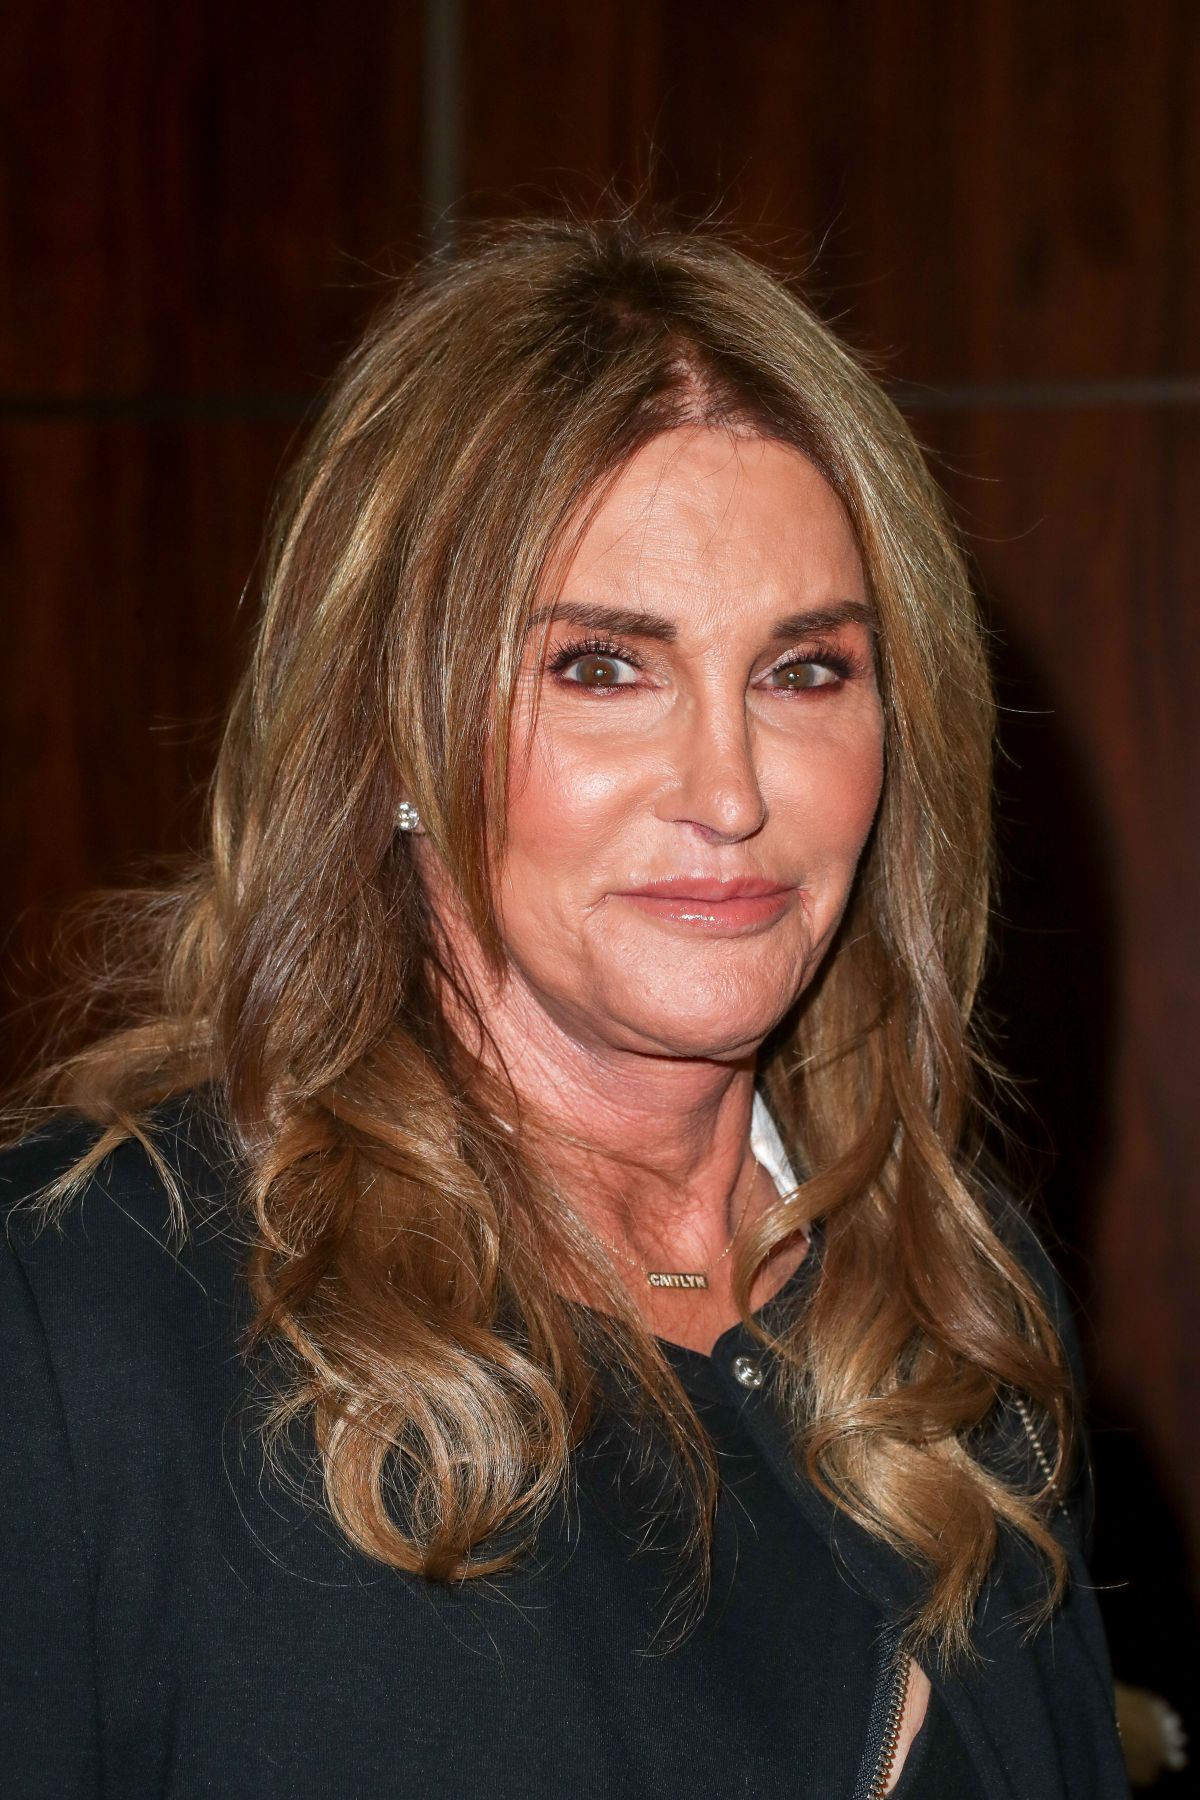 Caitlyn Jenner: A Role Model For Authenticity And Self-Acceptance